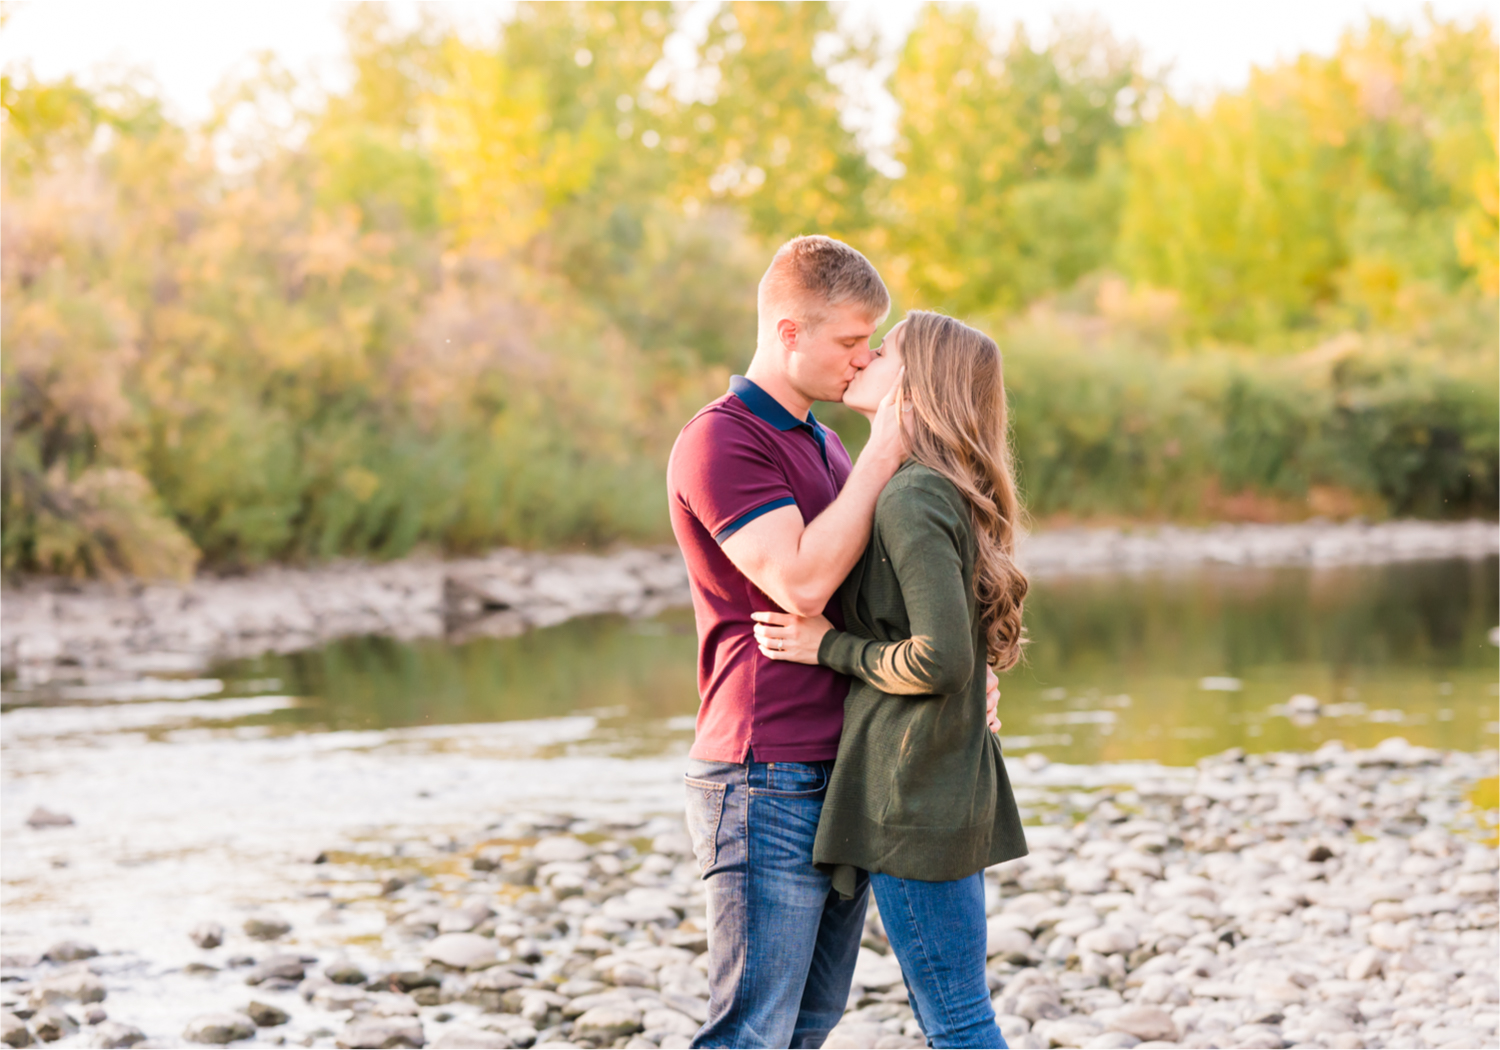 Fall Engagement at Prospect Ponds in Fort Collins | Britni Girard Photography | Colorado Wedding Photography and Videography | Husband and Wife Team | Trails of fall leaves and romantic snuggles under the canopy of color